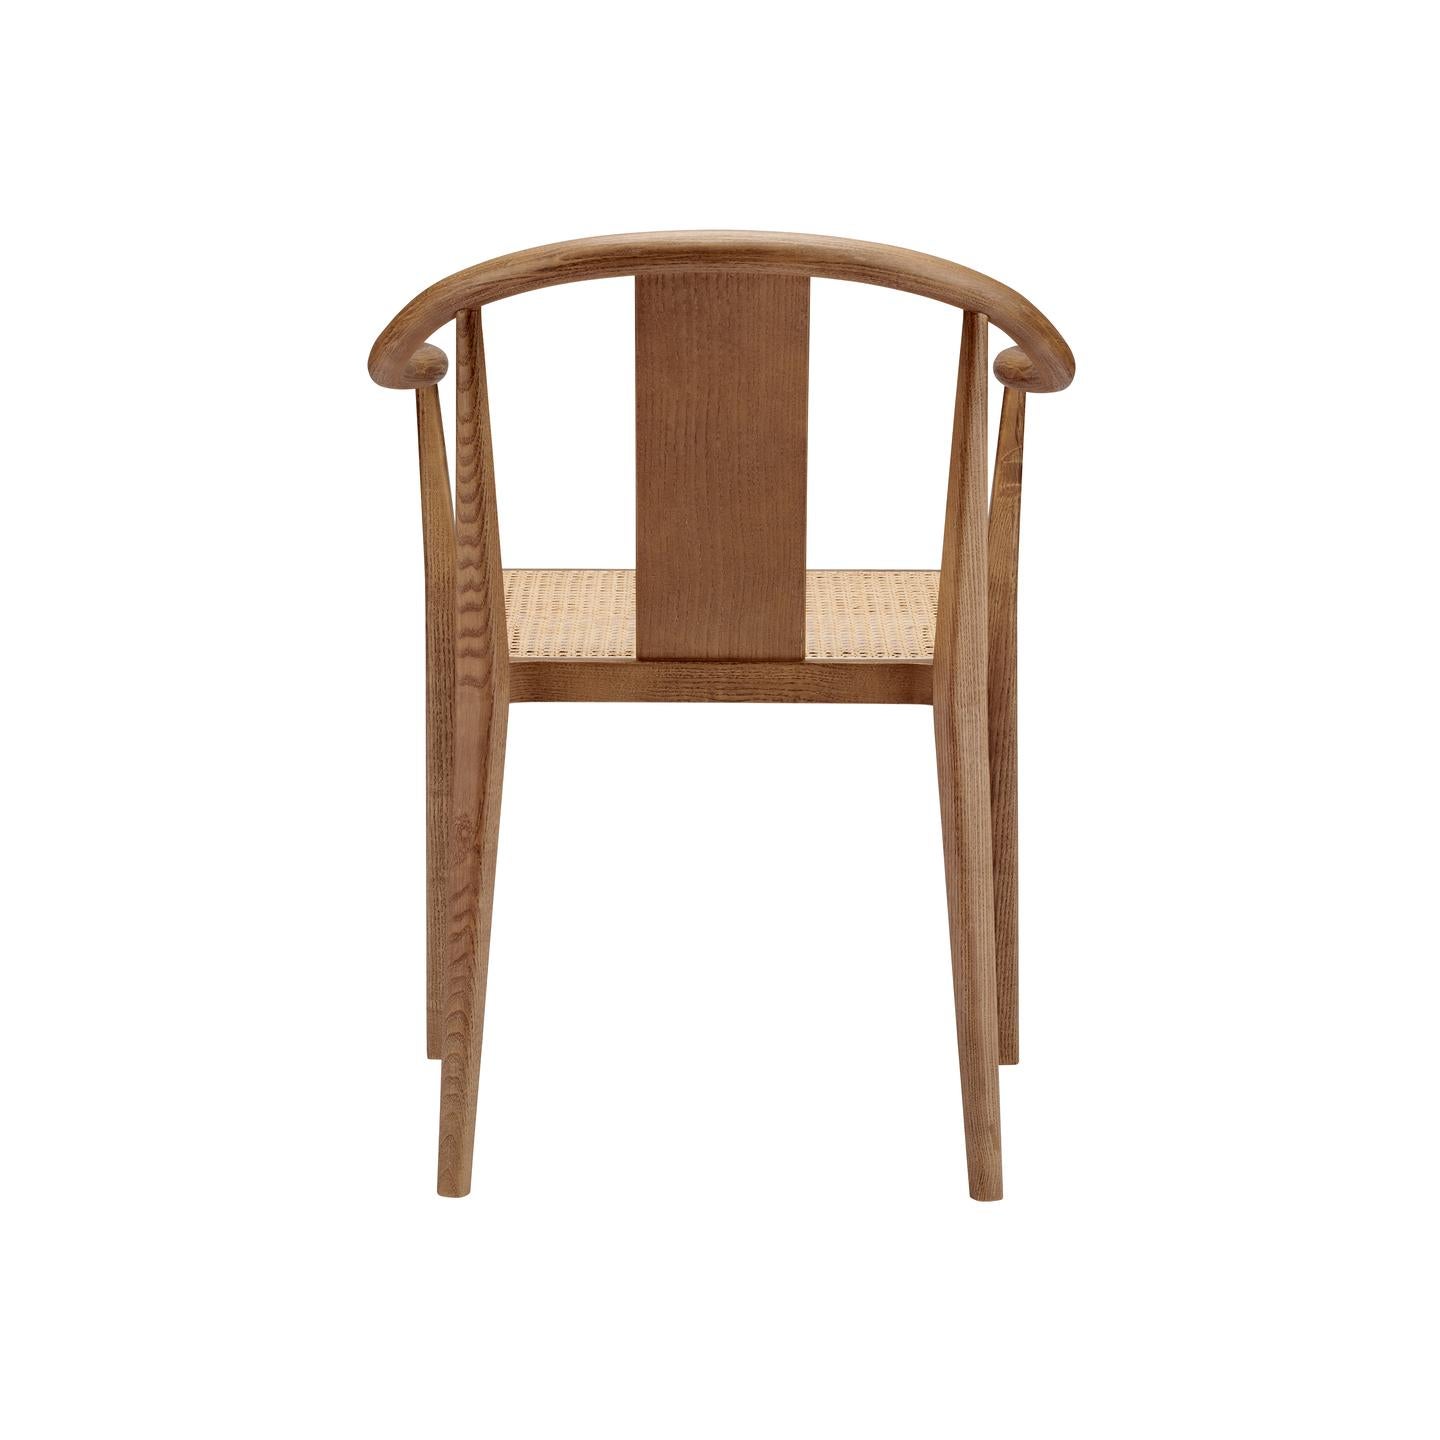 'Shanghai' Chair by Norr11, Light Smoked Oak, Natural Rattan For Sale 8